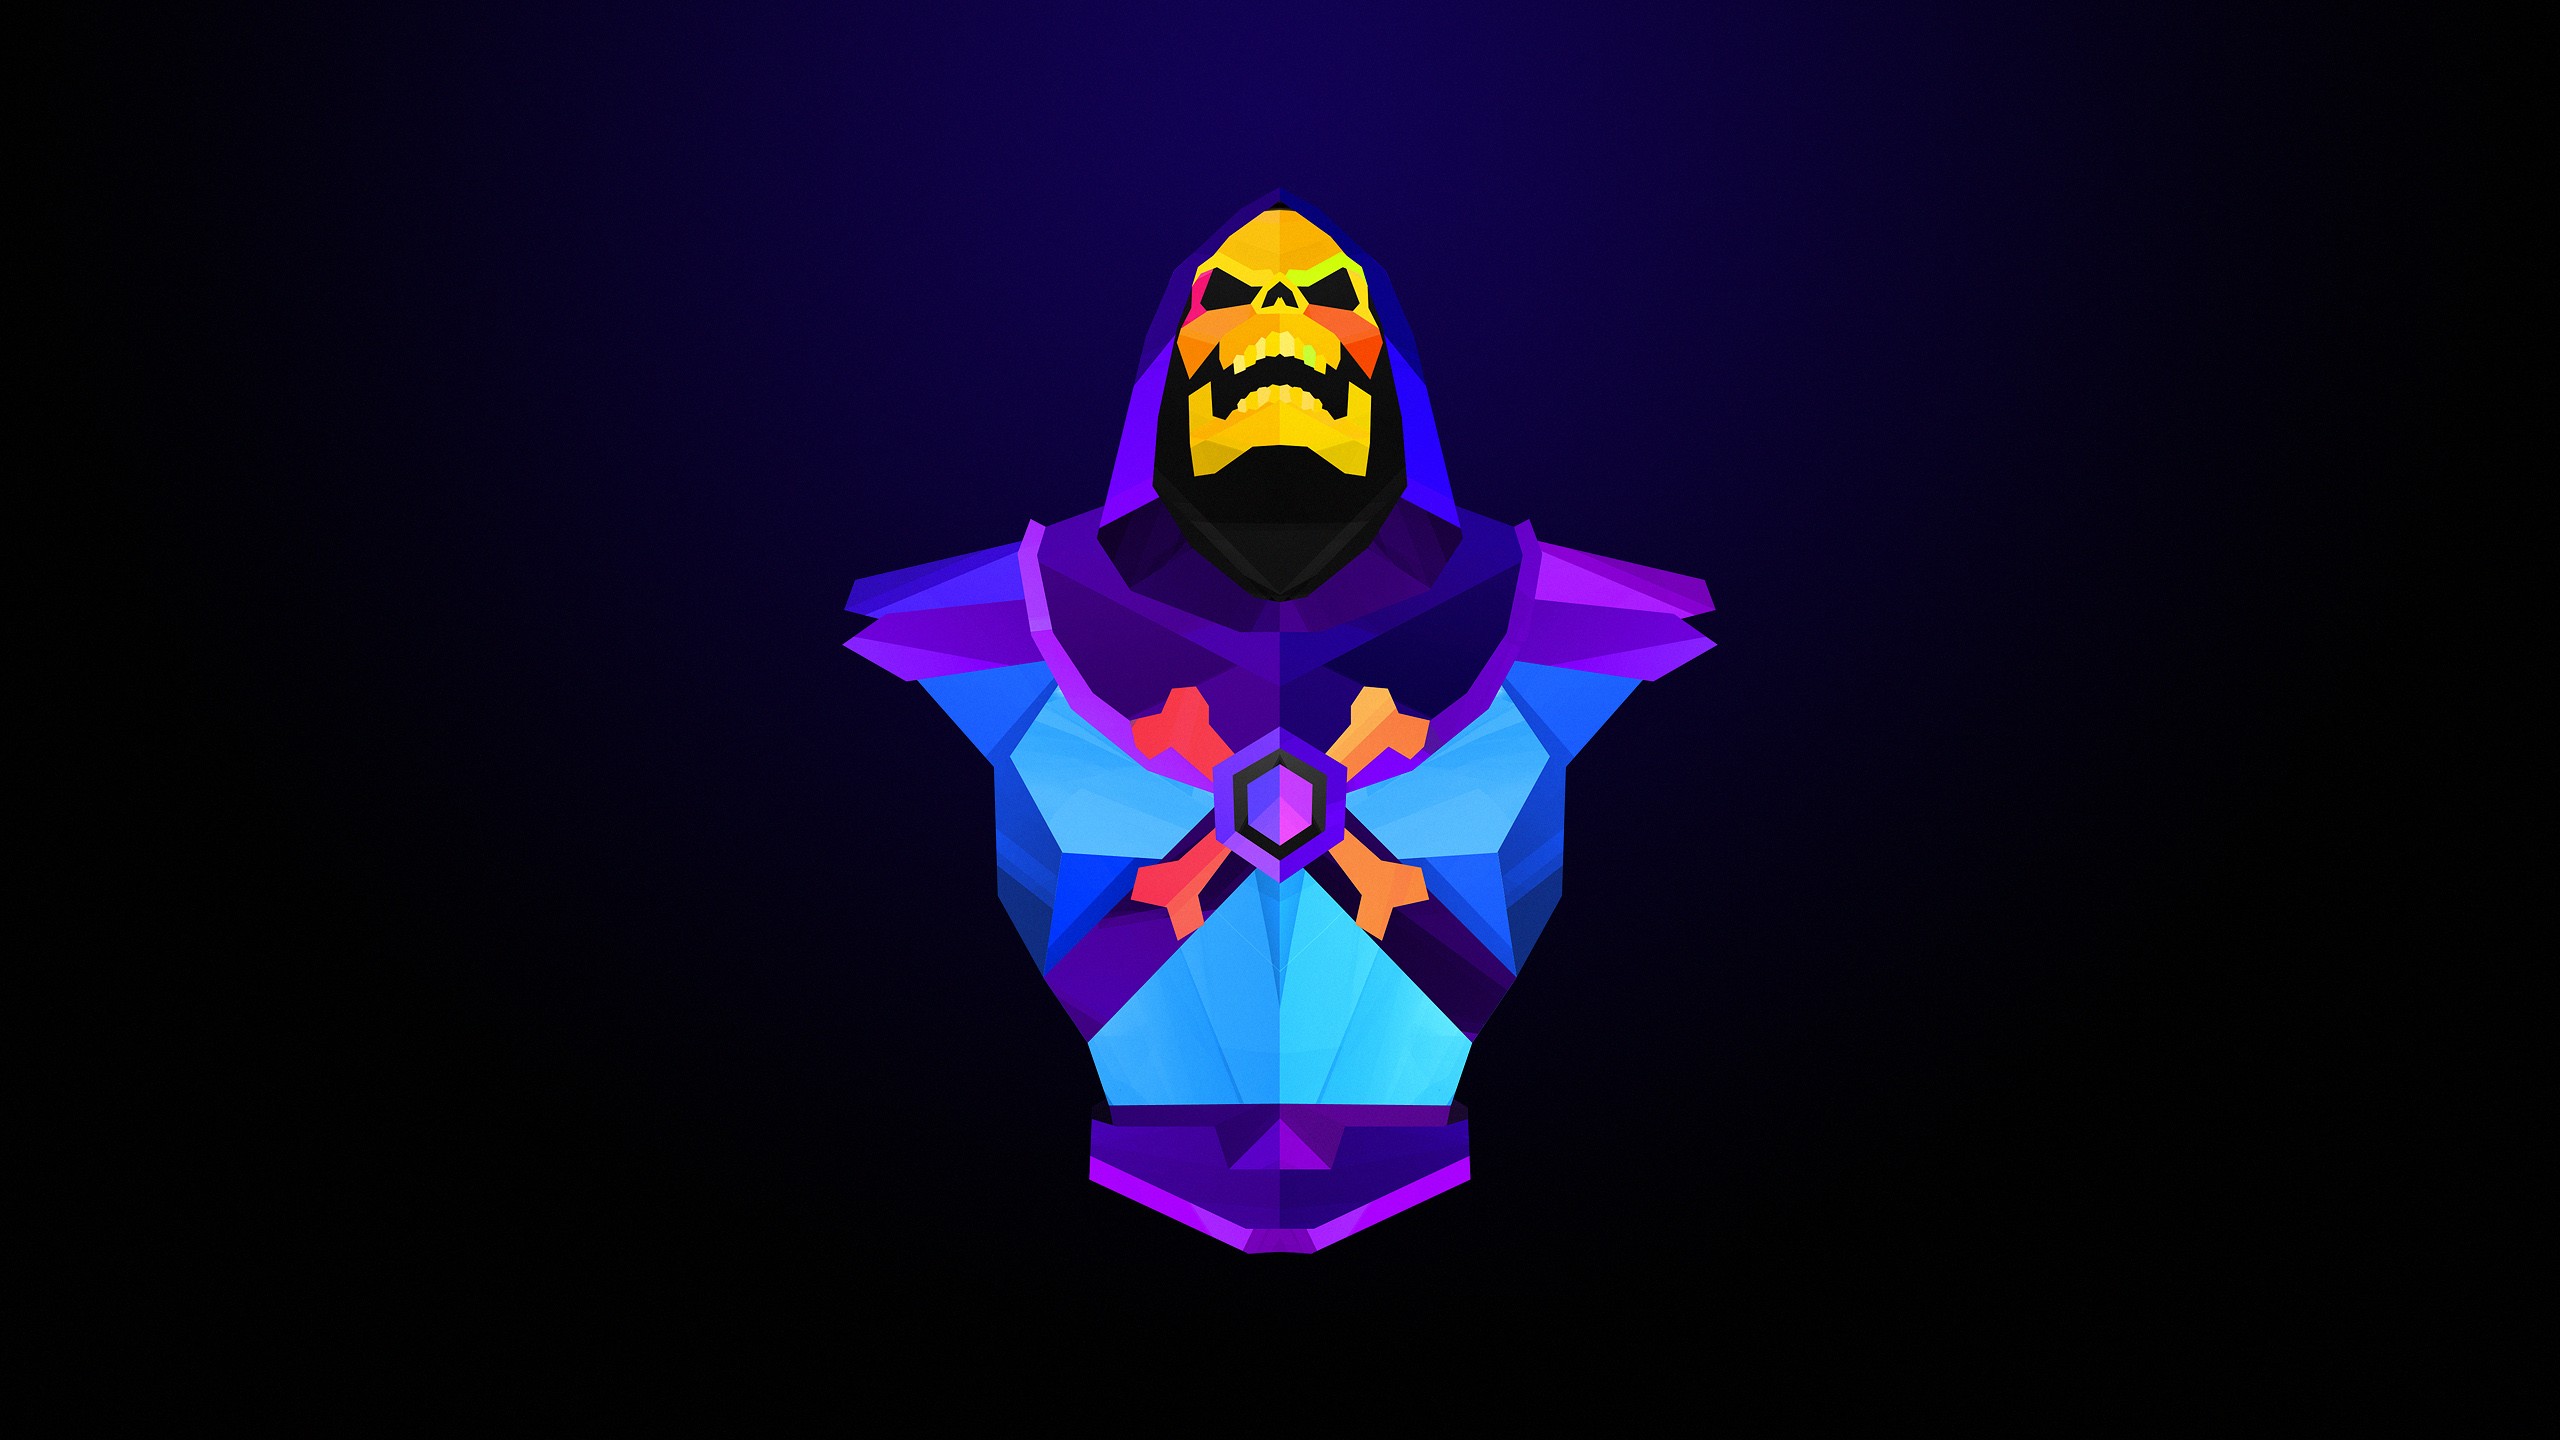 Abstract Skeletor Justin Maller Villains He Man Skeletor Artwork He Man And The Masters Of The Unive 2560x1440